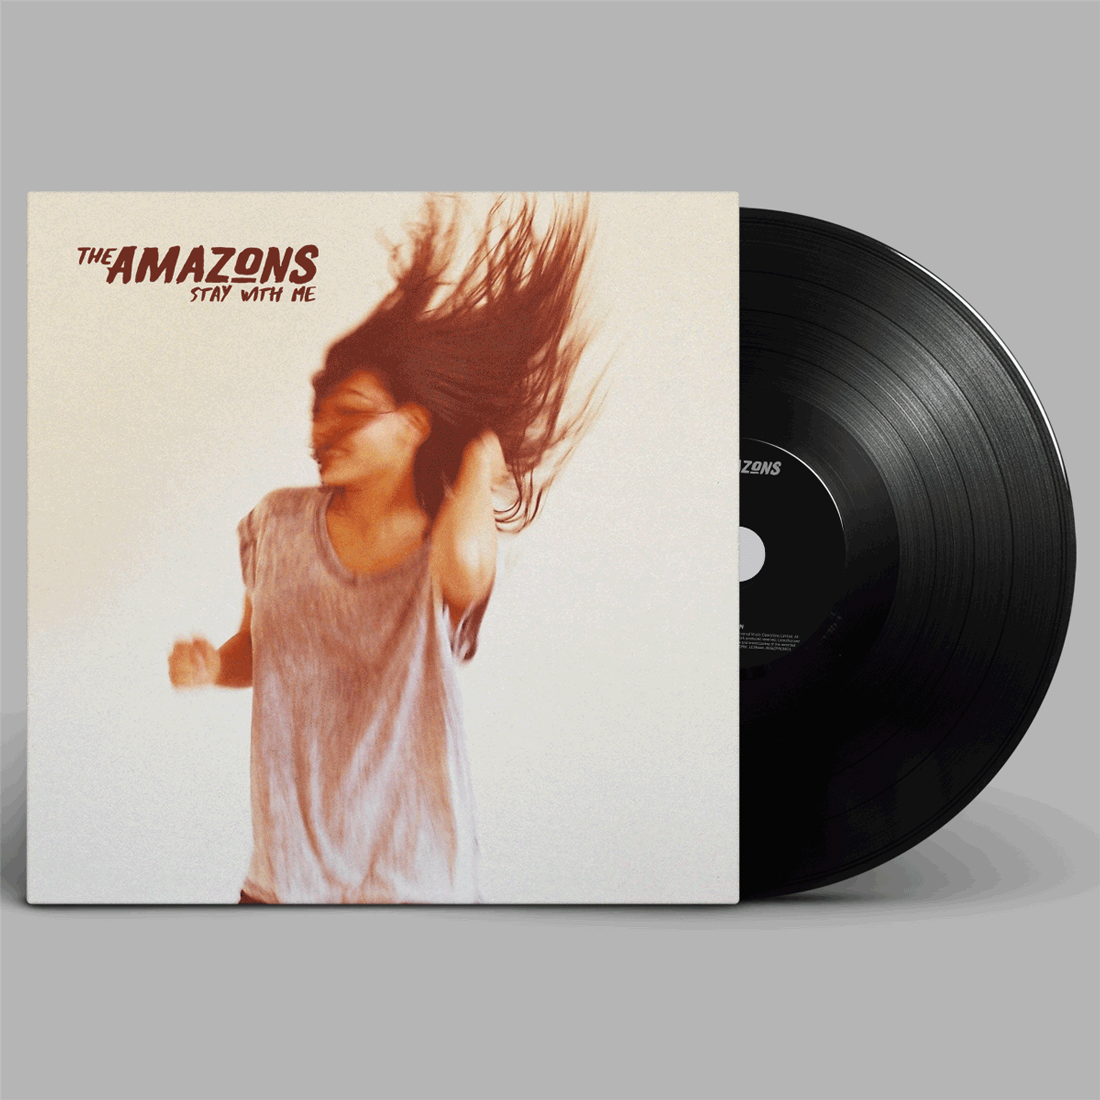 The Amazons - Nightdriving / Stay With Me 7"